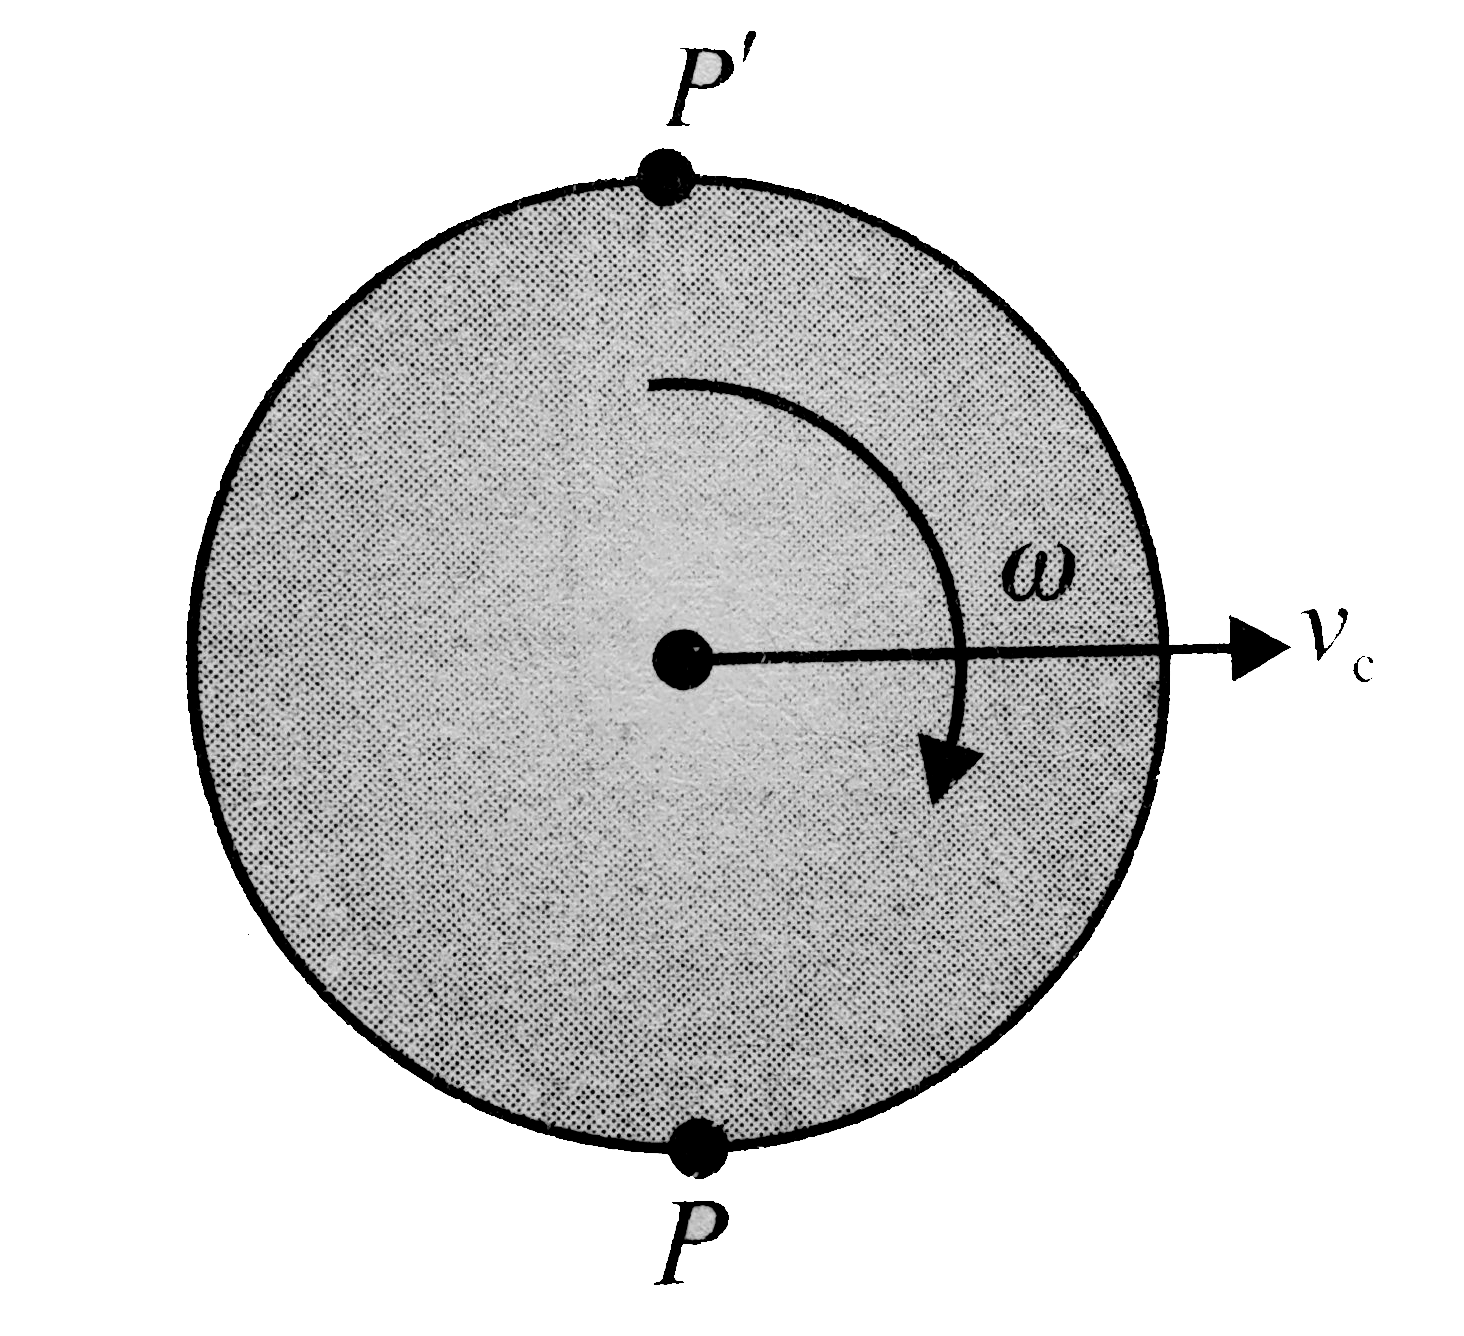 A sphere is moving towards the positive x-axis with a velocity v(c) and rotates clockwise with angular speed omega shown in Fig. such that v(c)gtomegaR. The instantaneous axis of rotation will be